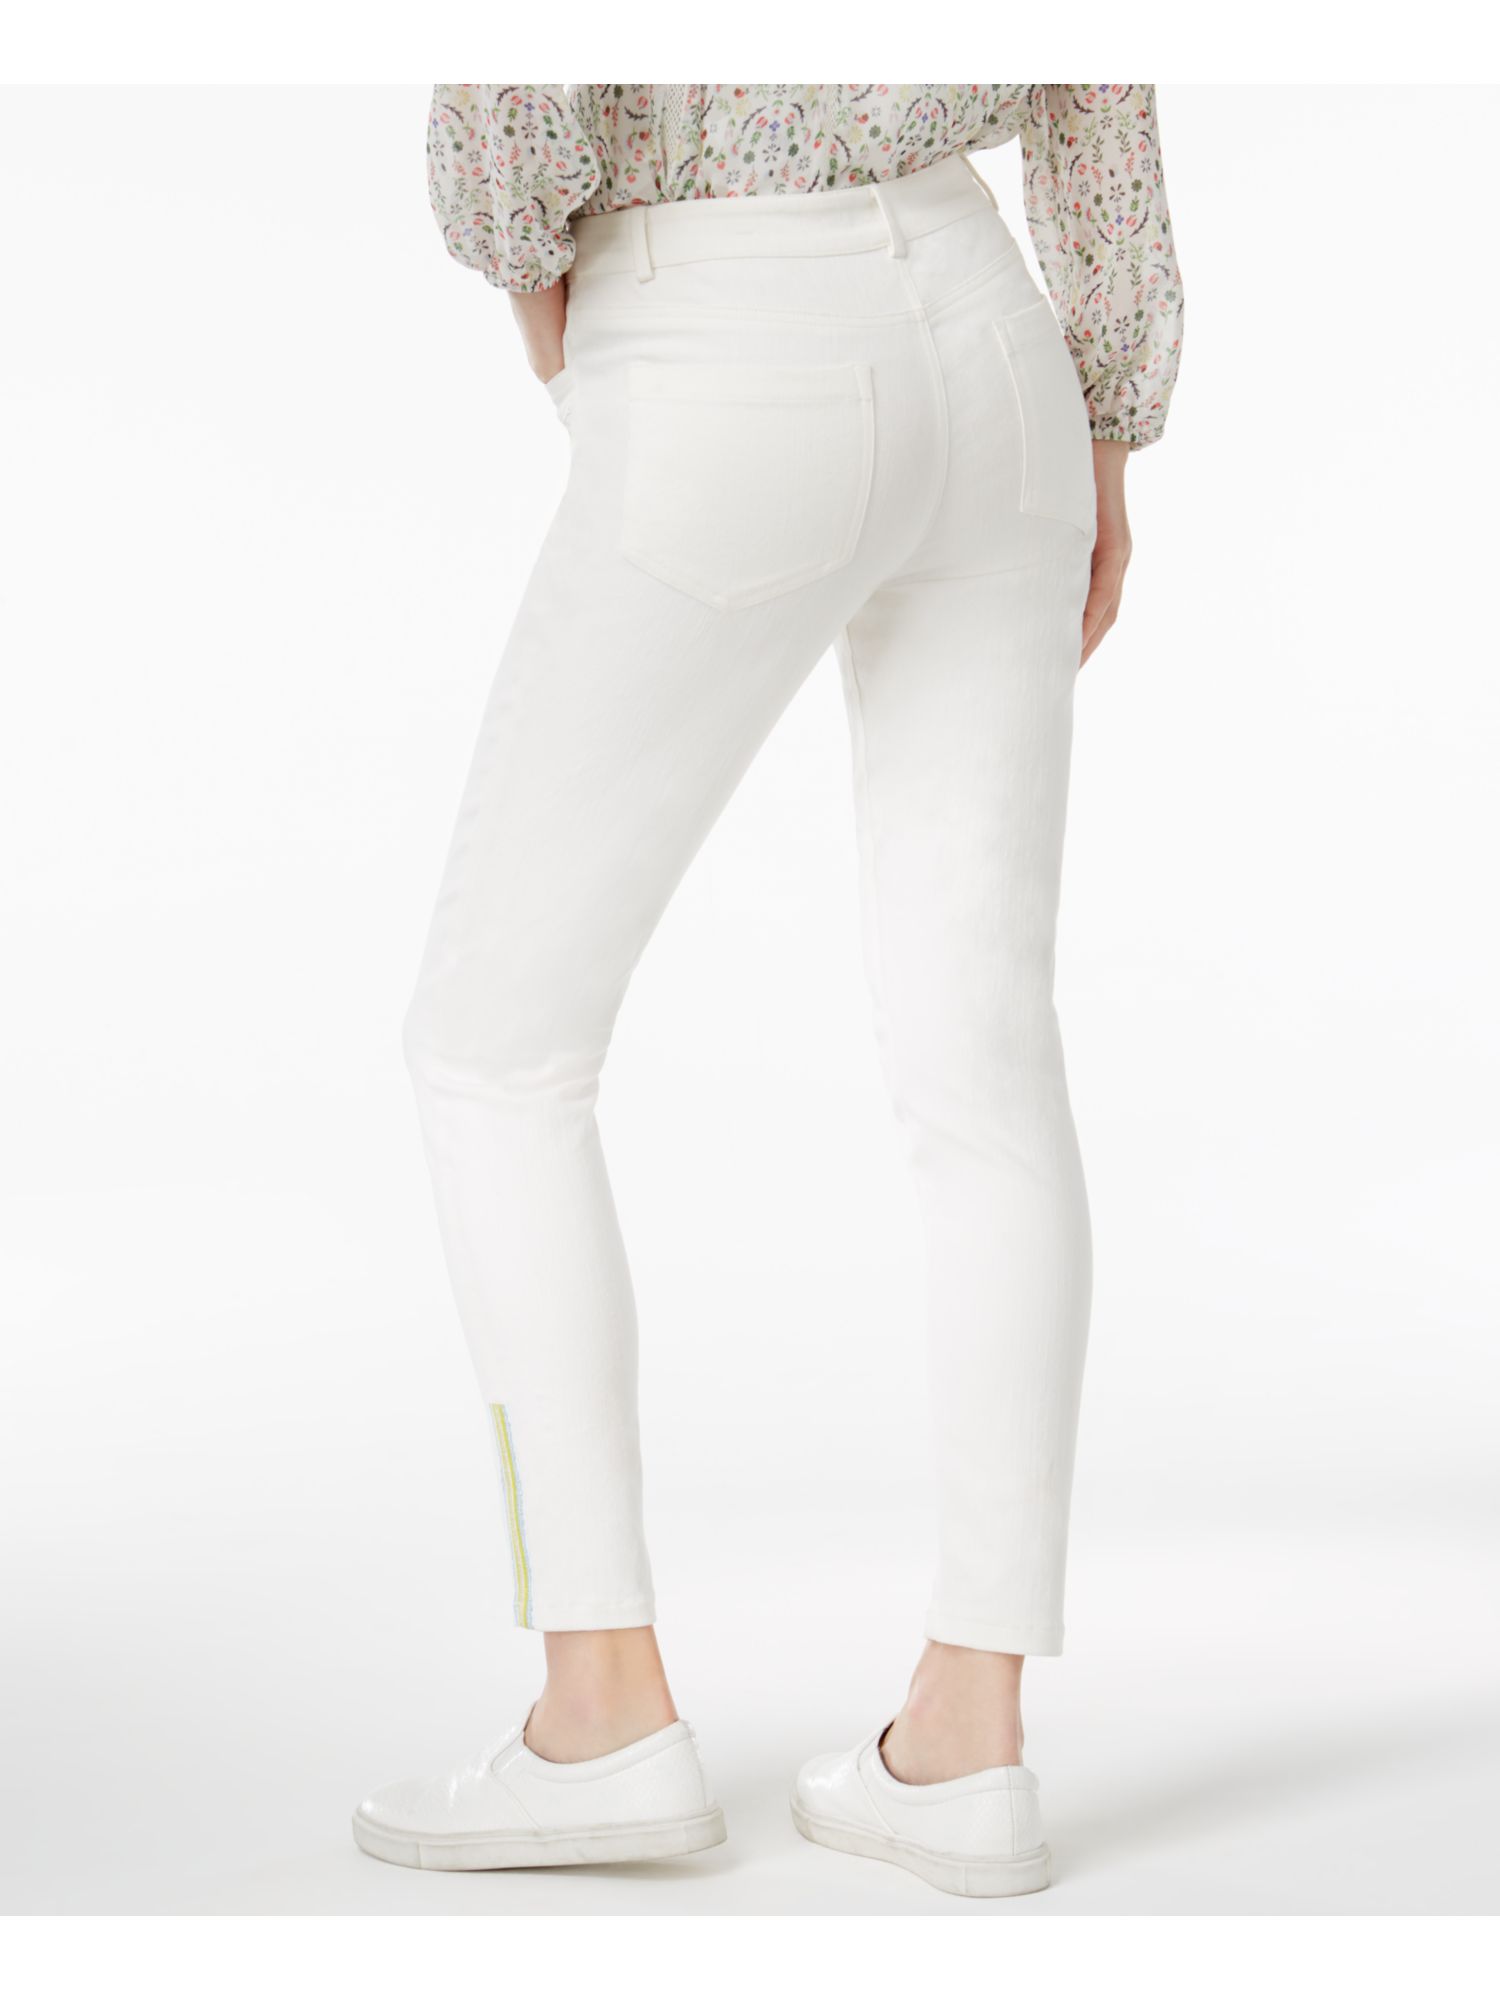 CYNTHIA ROWLEY Womens White Embroidered Pants 10 - image 2 of 4